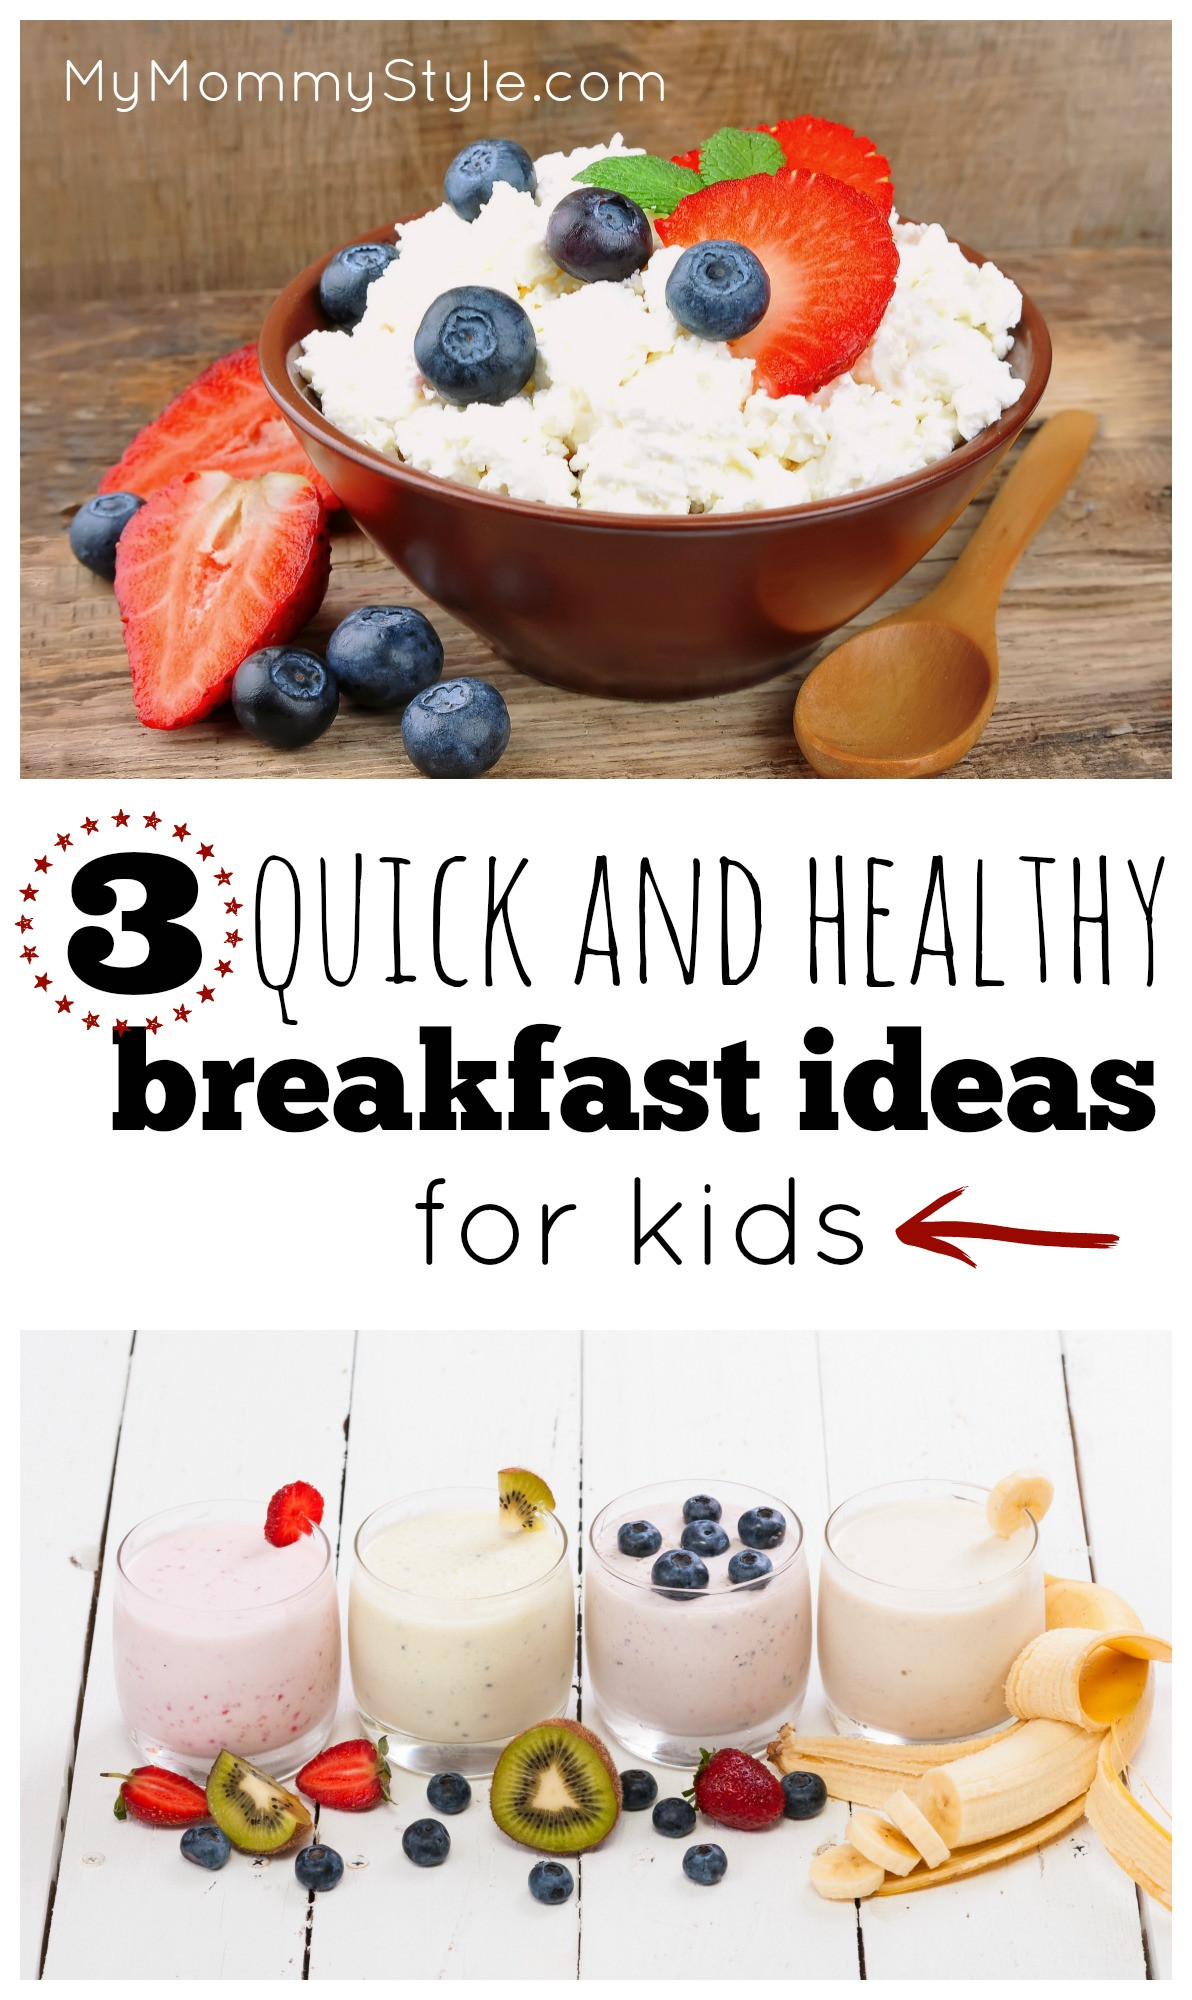 Easy Breakfast Recipes For Kids
 3 Simple and Healthy Breakfast Ideas My Mommy Style